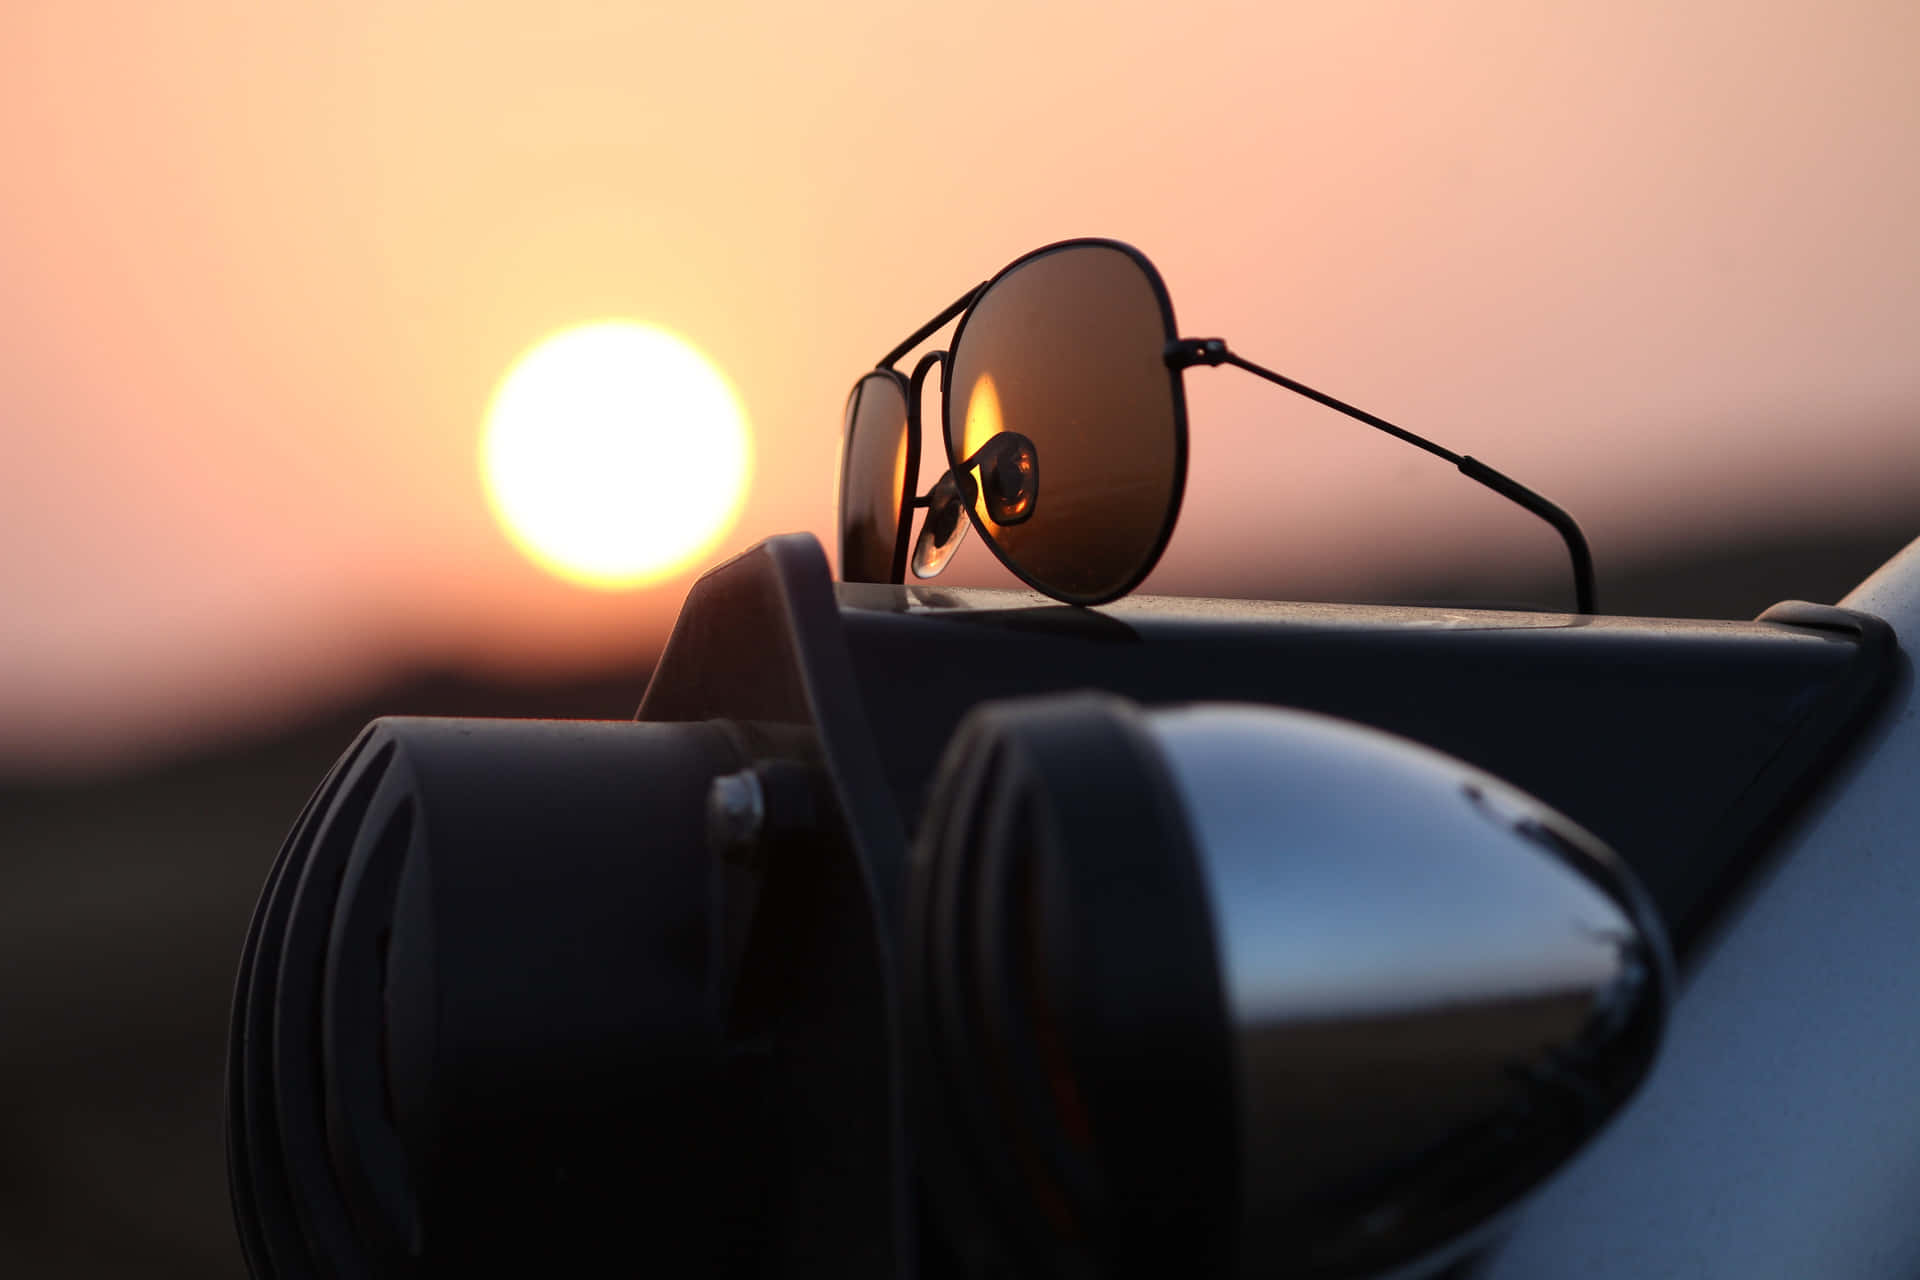 Stylish Sunglasses On A Table By The Beach Background